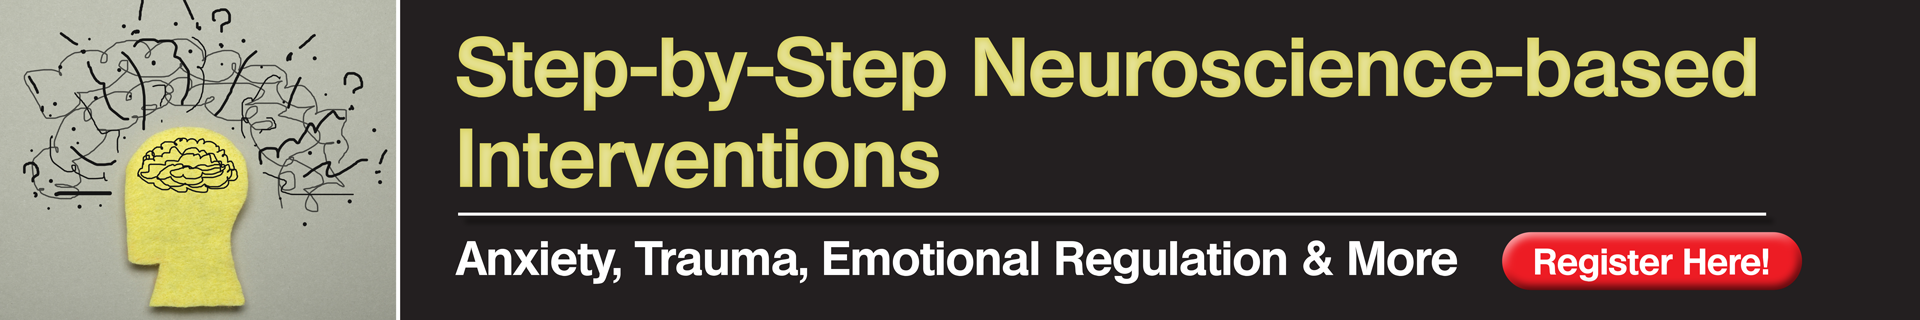 Step-by-Step Neuroscience-based Interventions: Anxiety, Trauma & Emotional Regulation & More